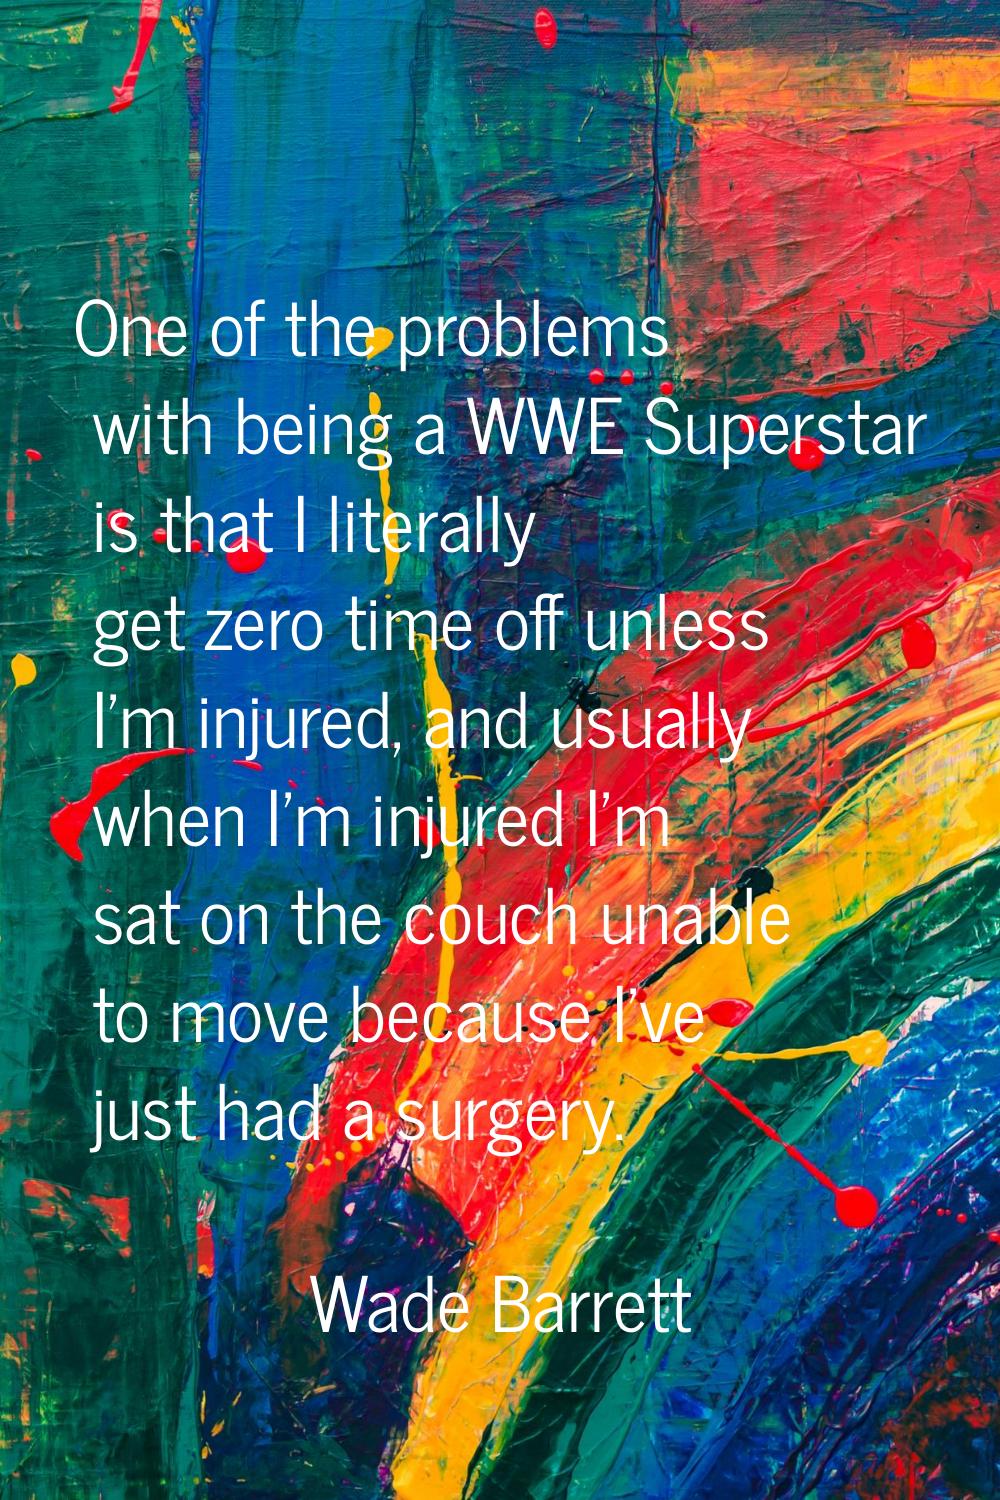 One of the problems with being a WWE Superstar is that I literally get zero time off unless I'm inj